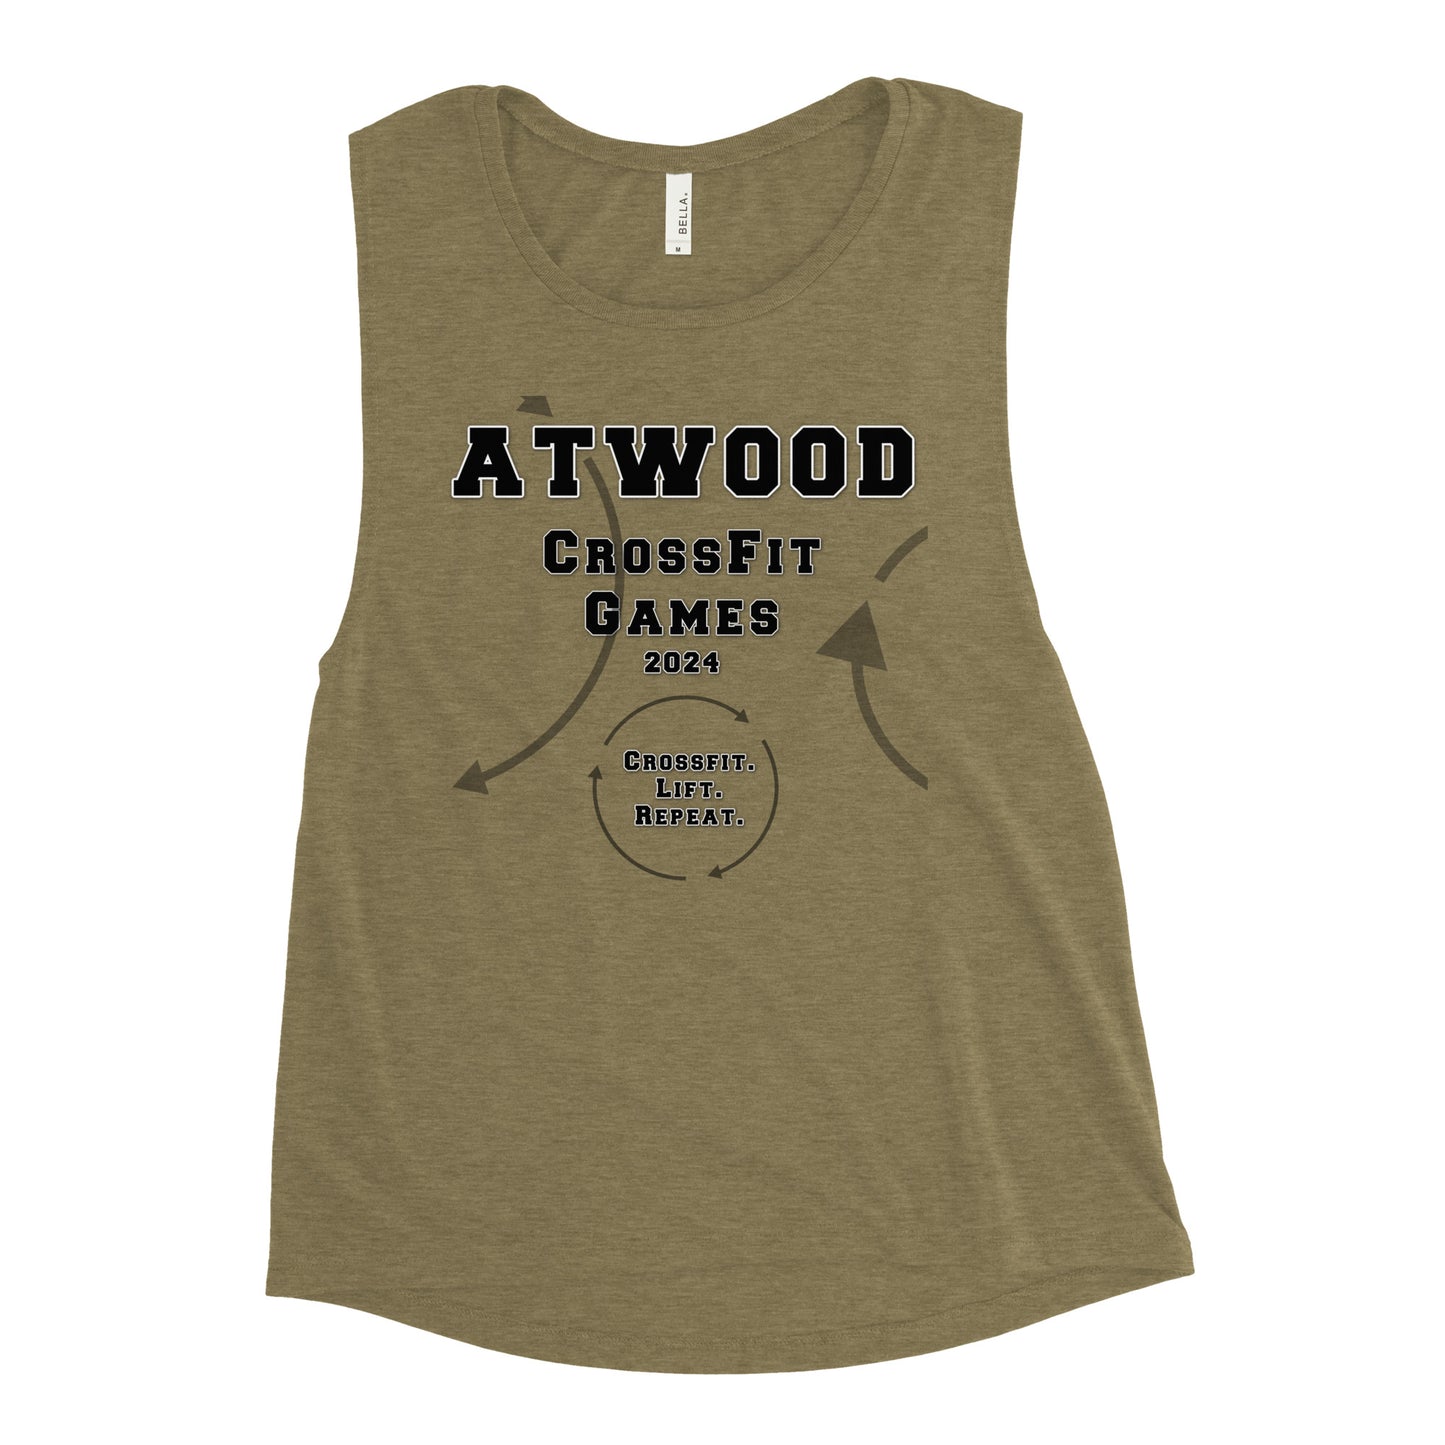 ATWOOD Women's Muscle Tank